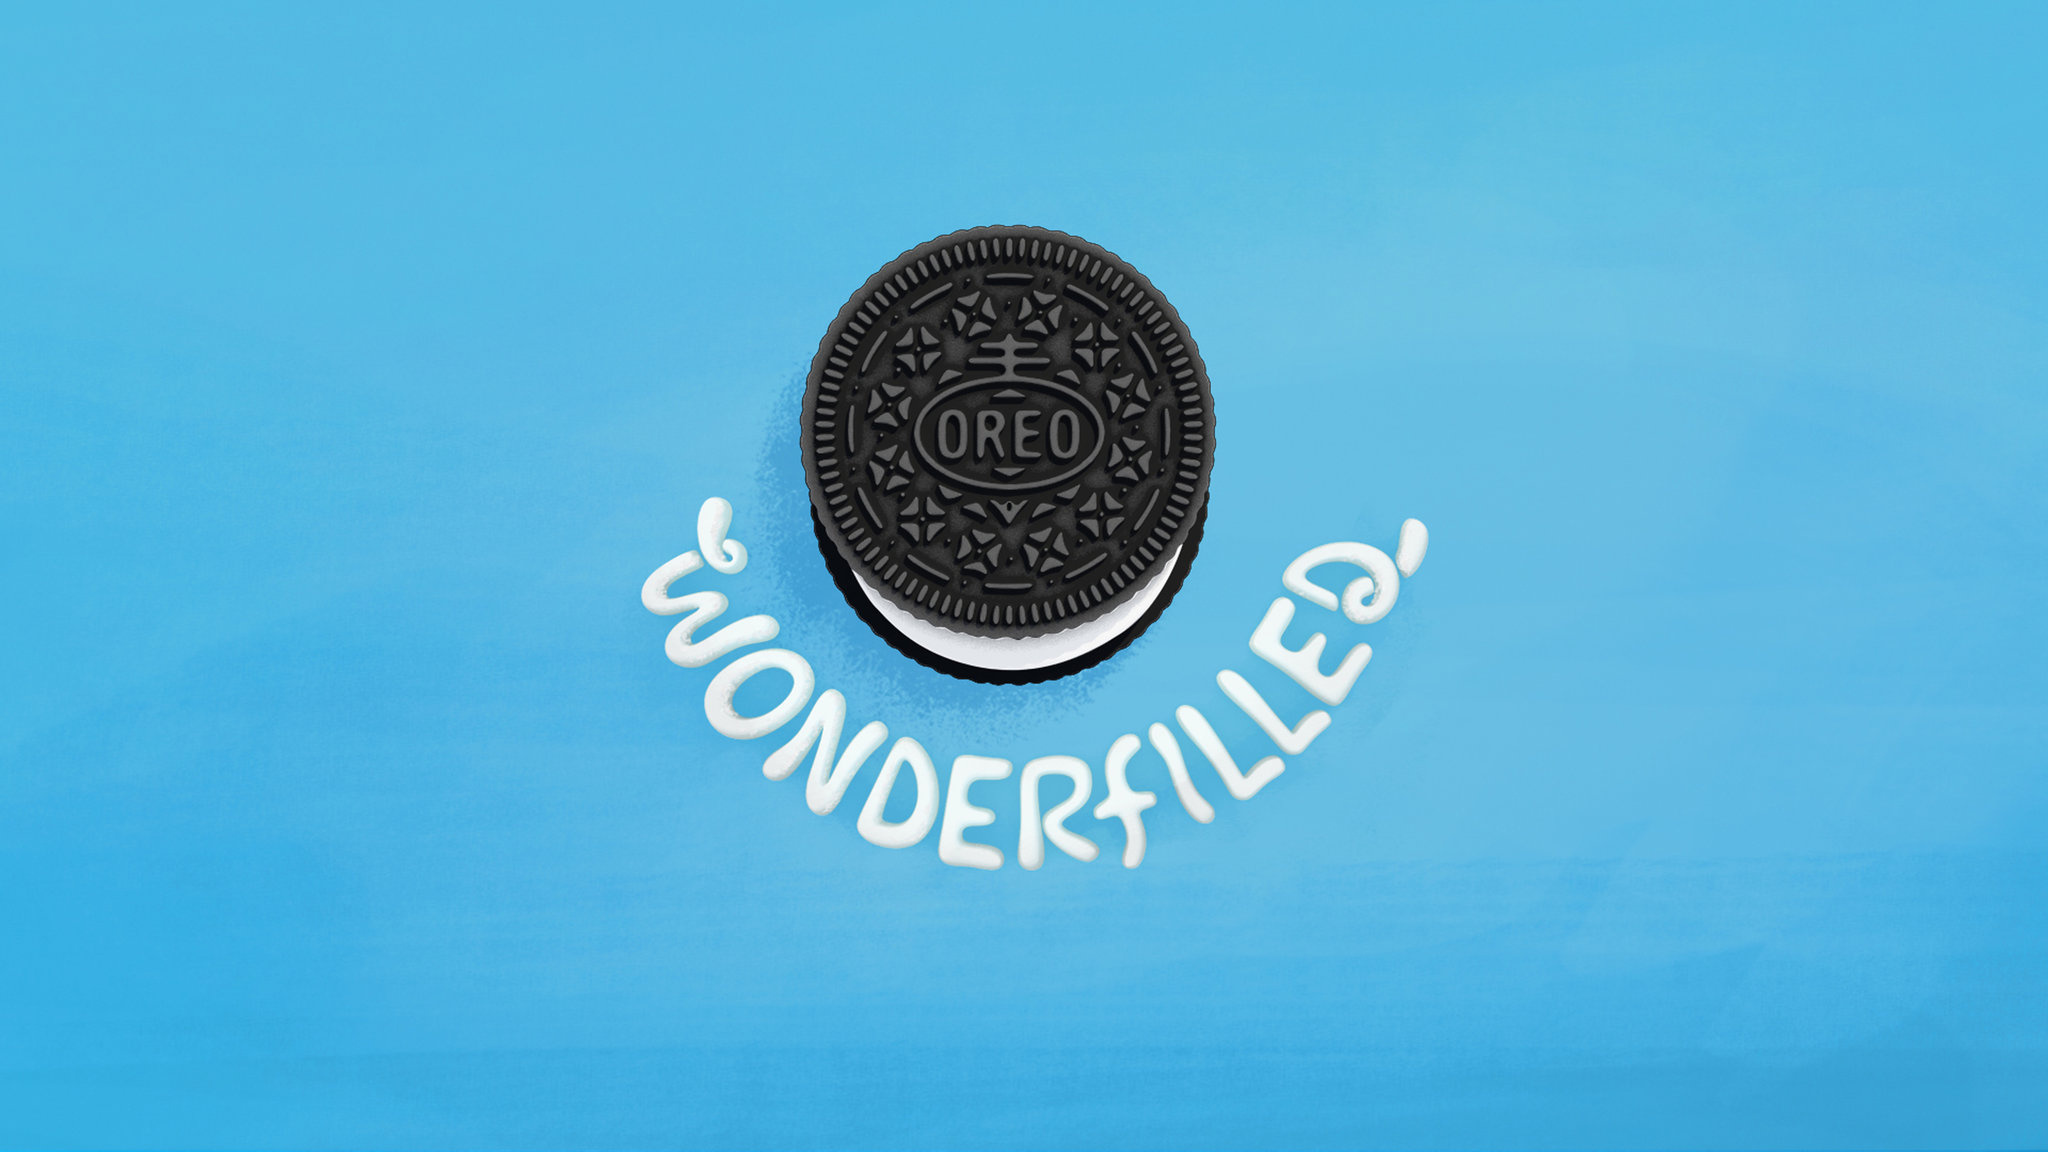 Oreo Cookies: The iconic chocolate cookie brand. 2050x1160 HD Wallpaper.